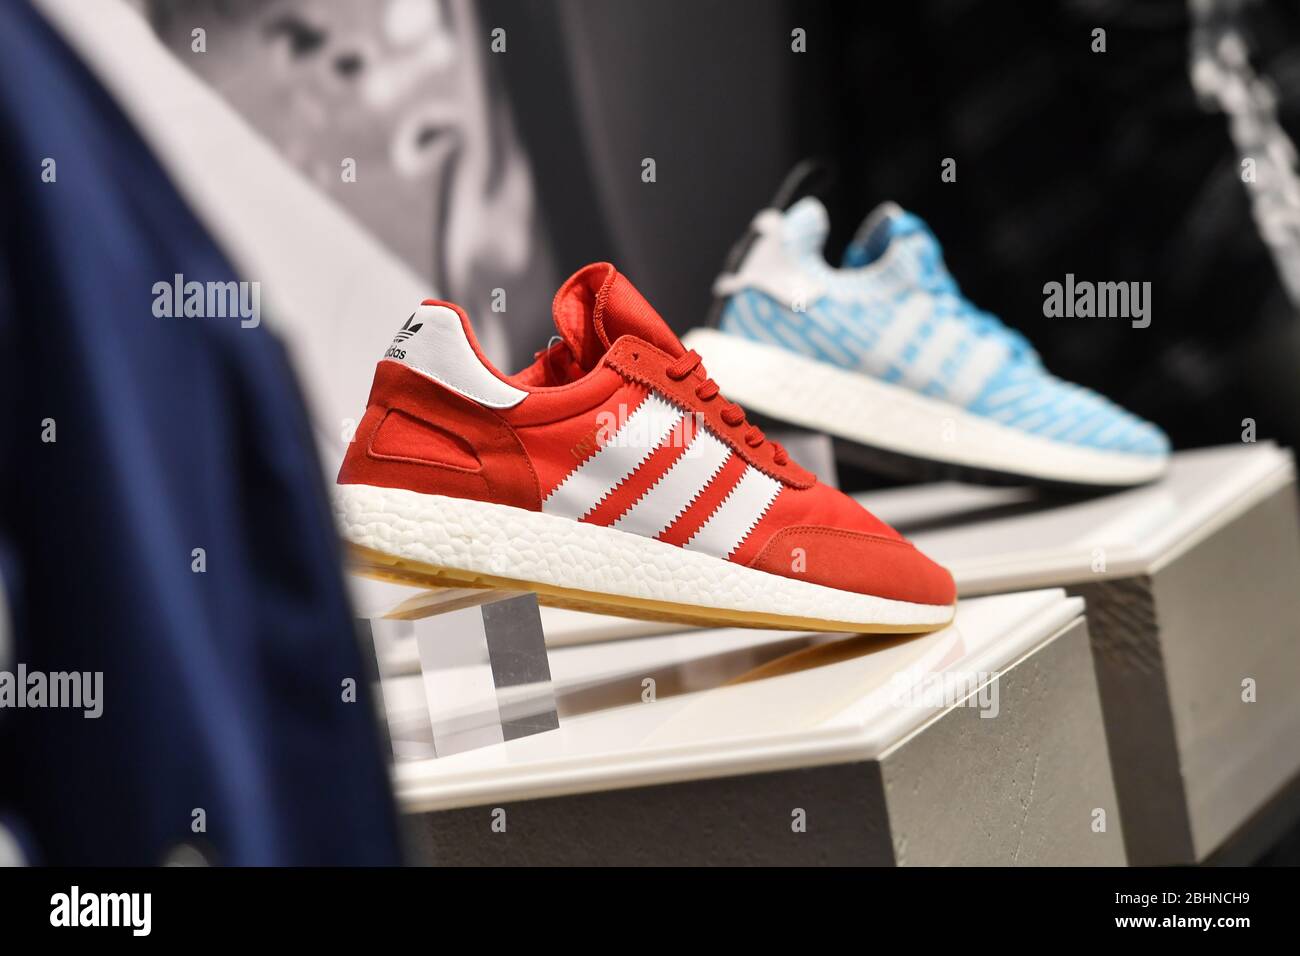 adidas the brand with the 3 stripes shoes